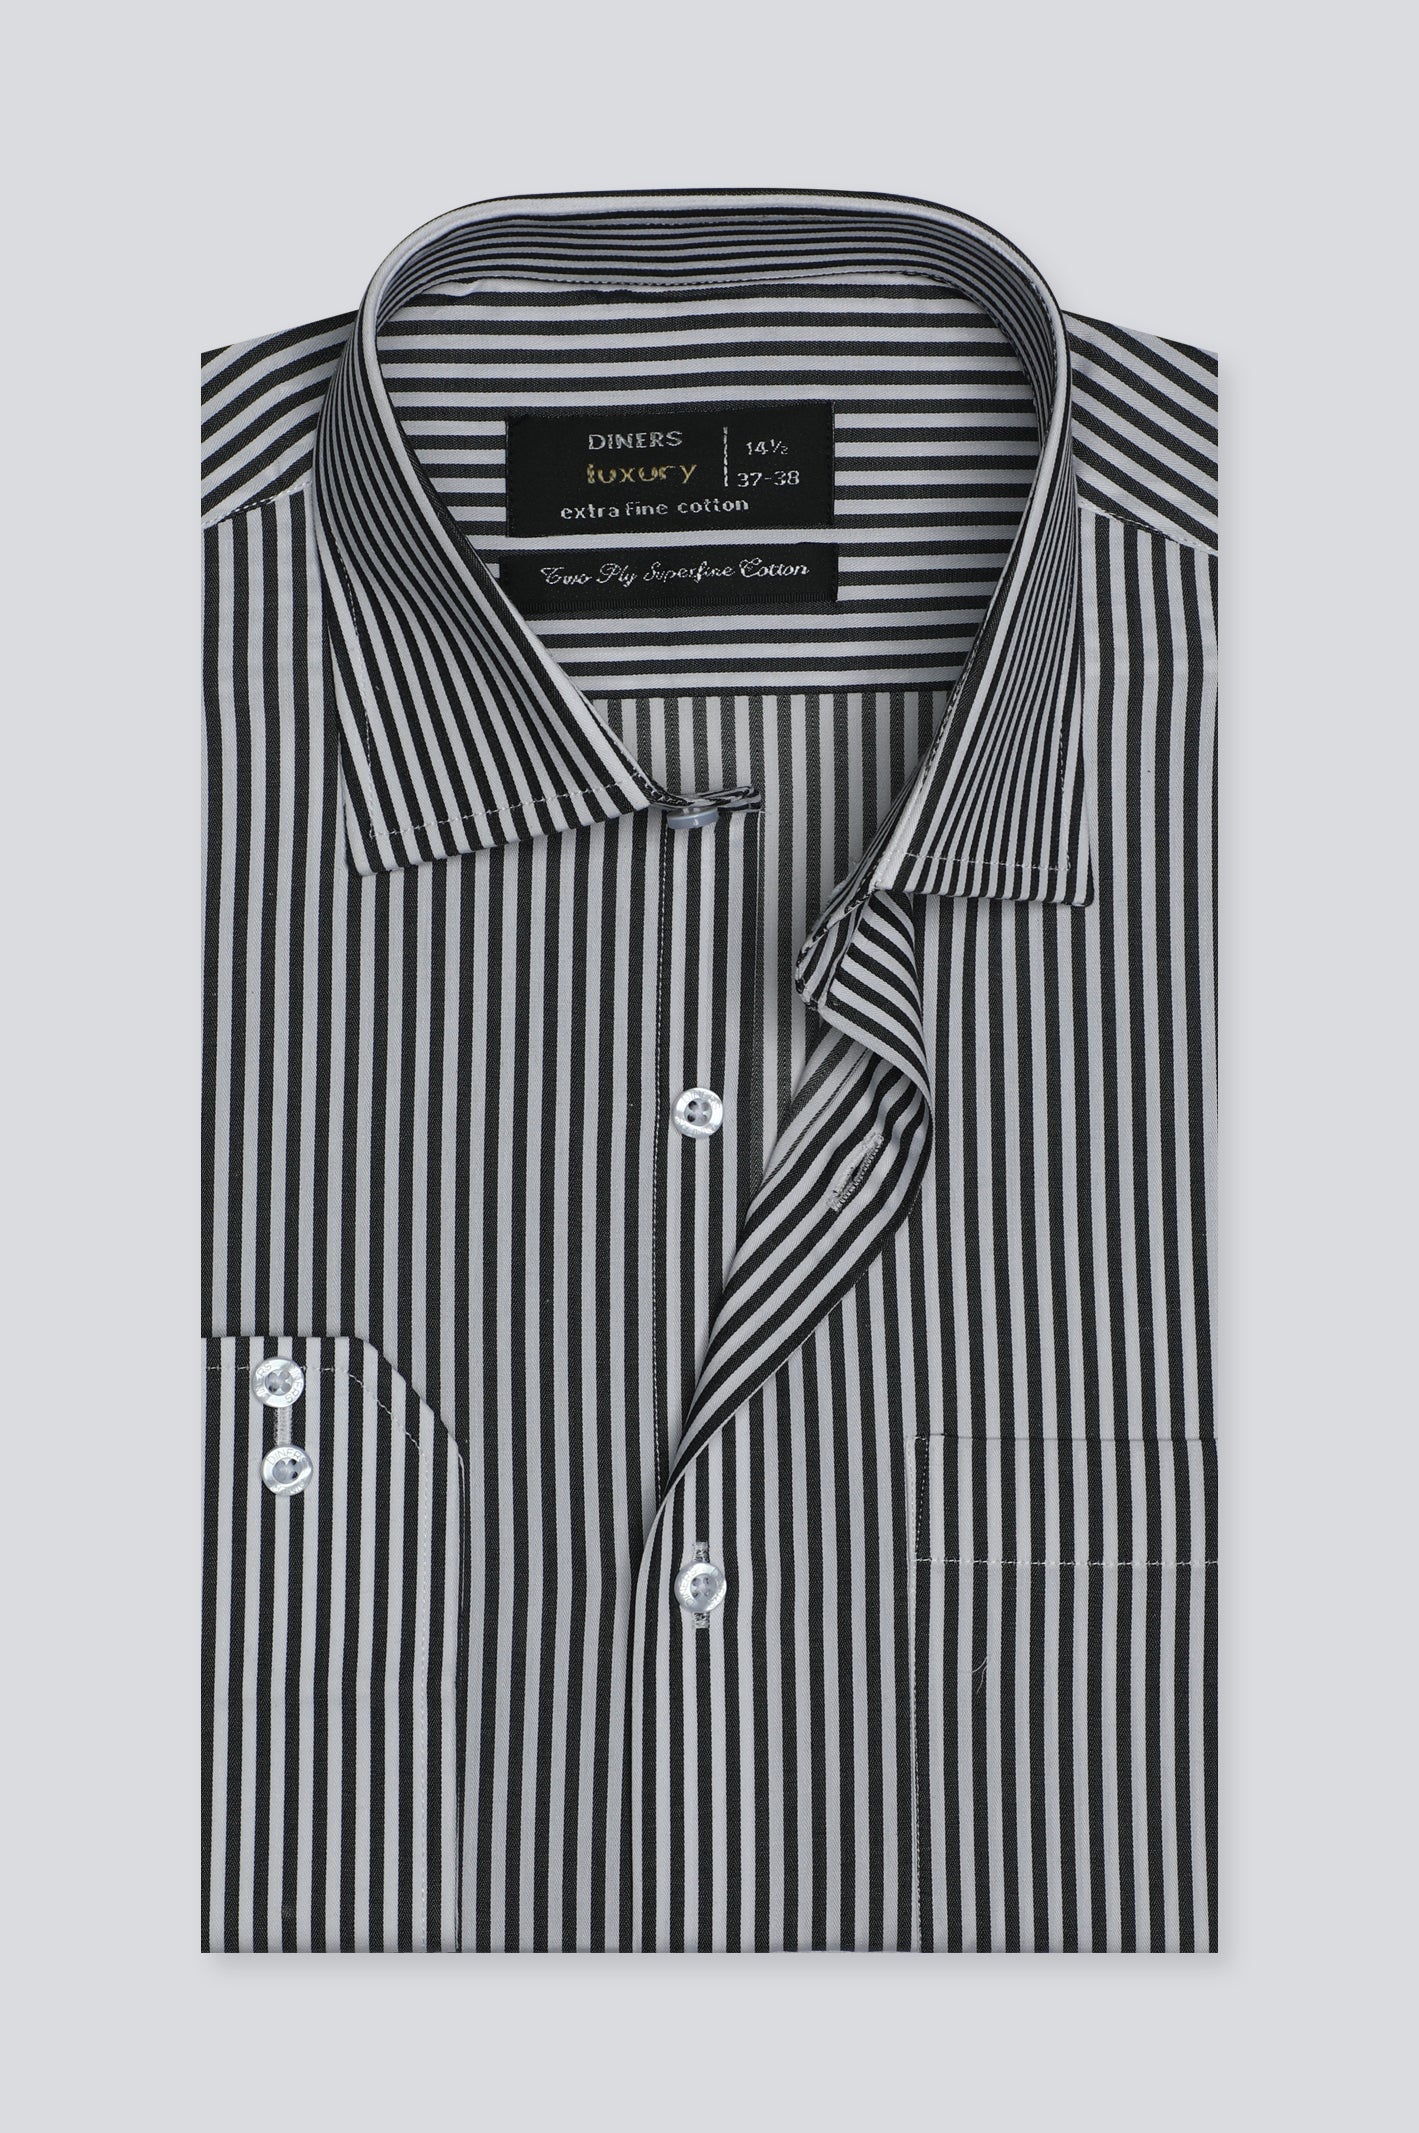 Black Bengal Stripe Formal Shirt From Diners